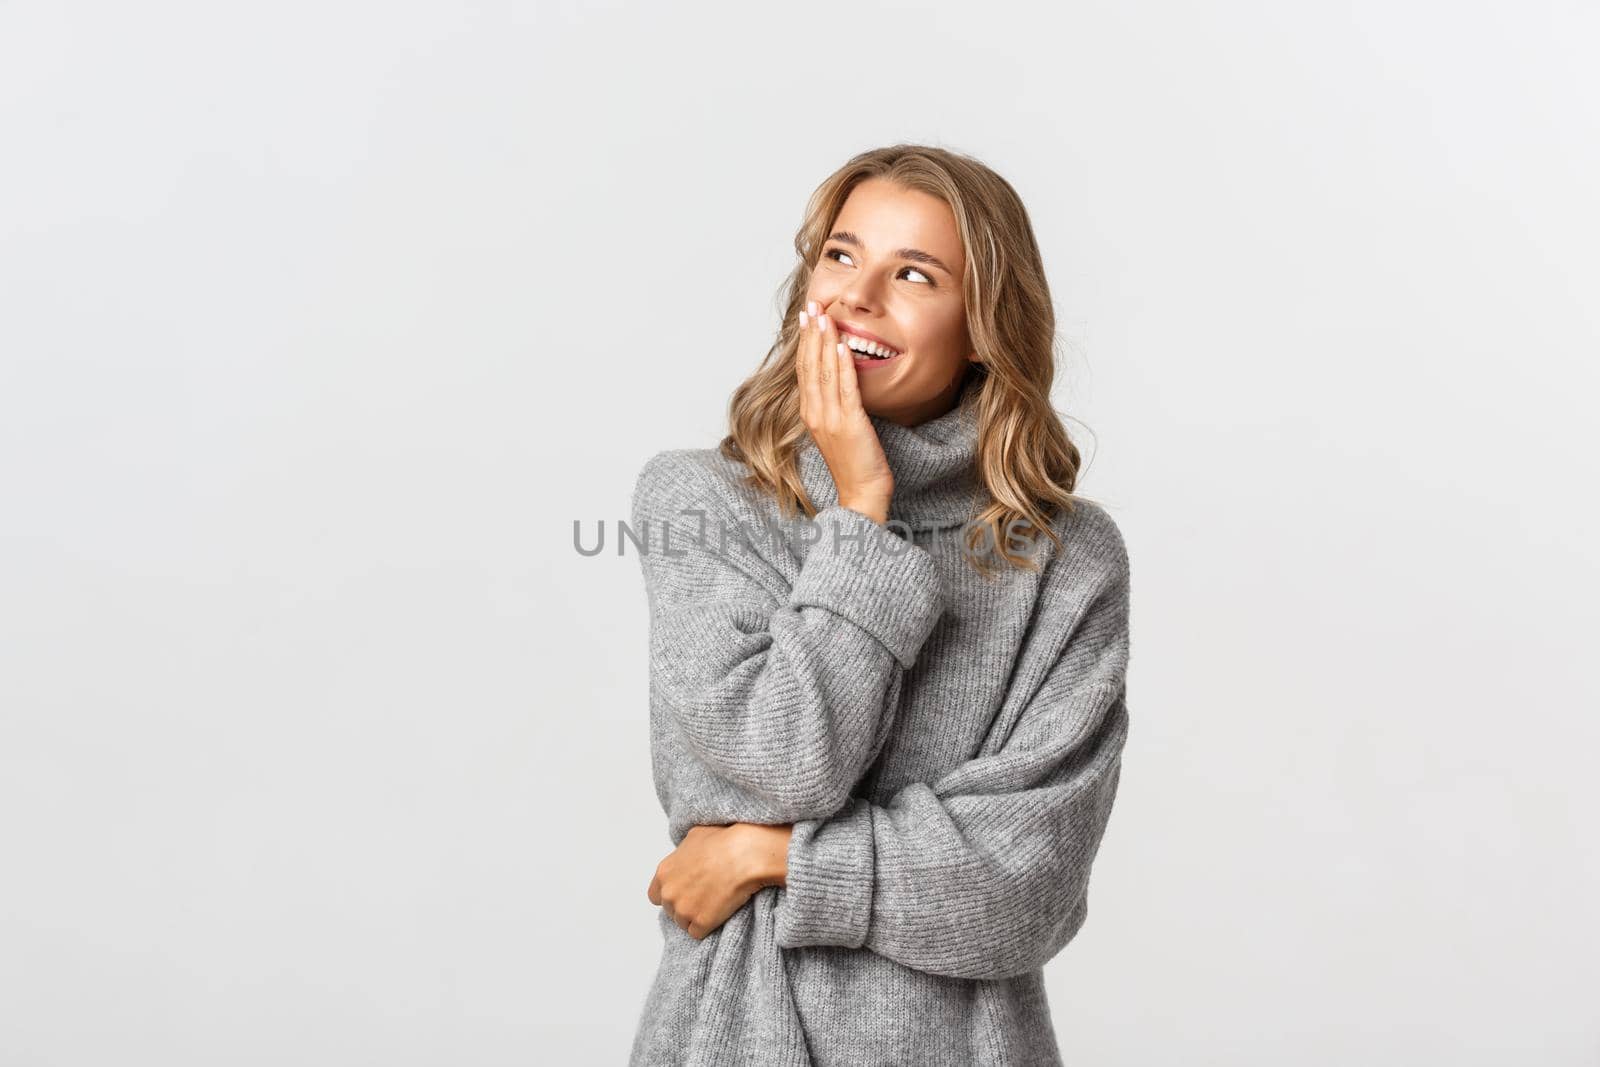 Portrait of attractive caucasian woman in grey sweater looking at logo at upper left corner, smiling and laughing, standing happy over white background.